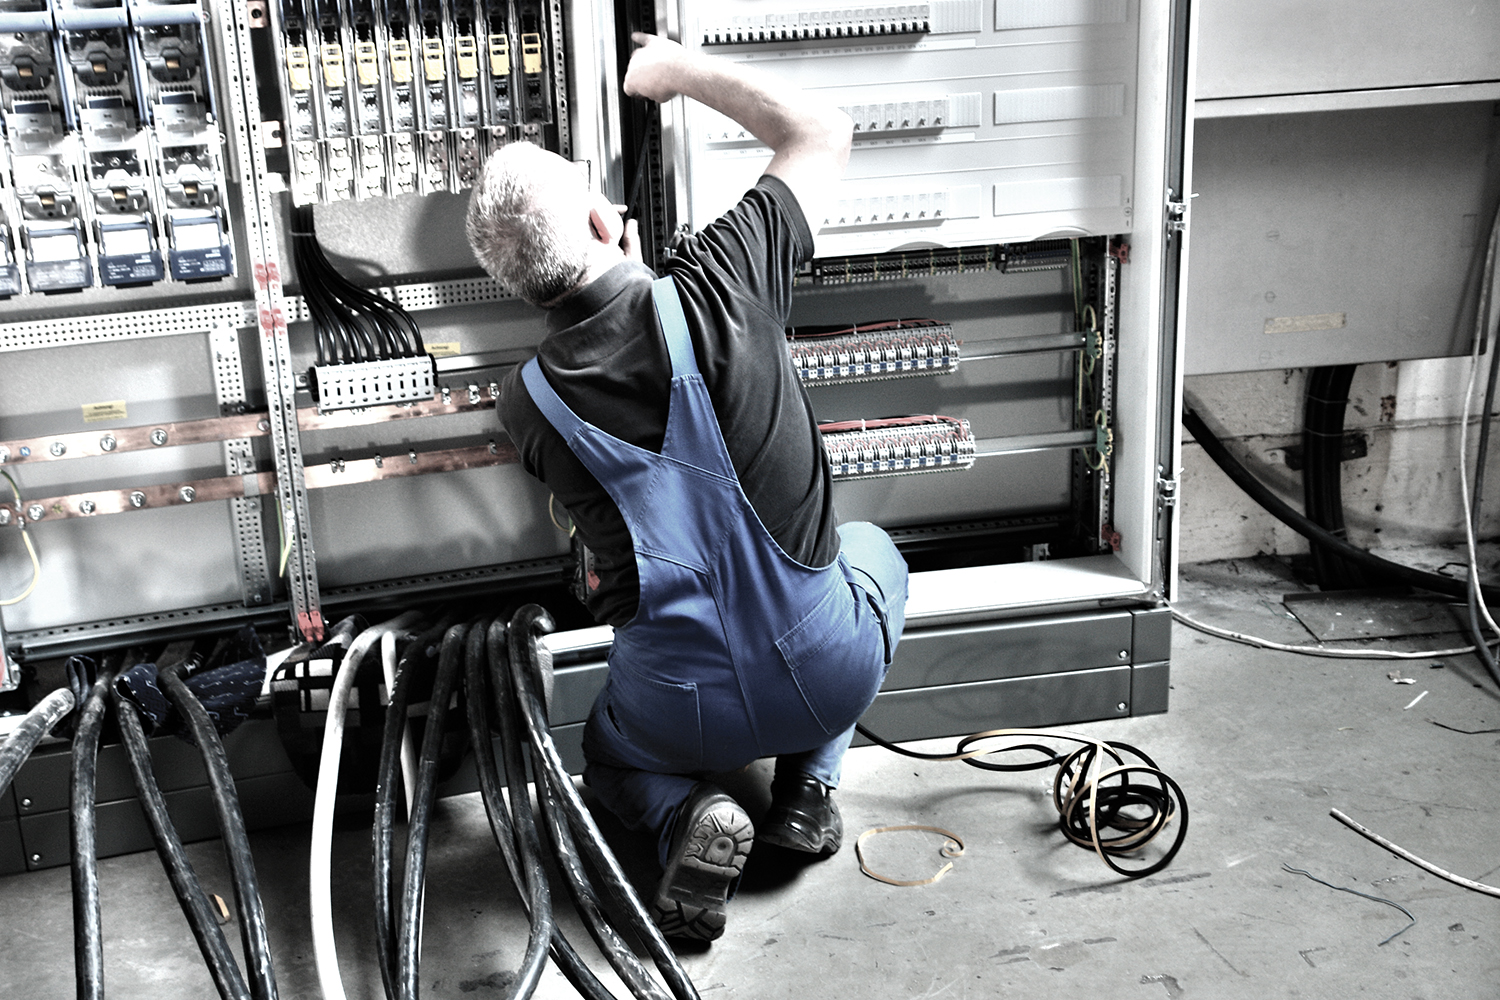 Service installer at an open switch box.